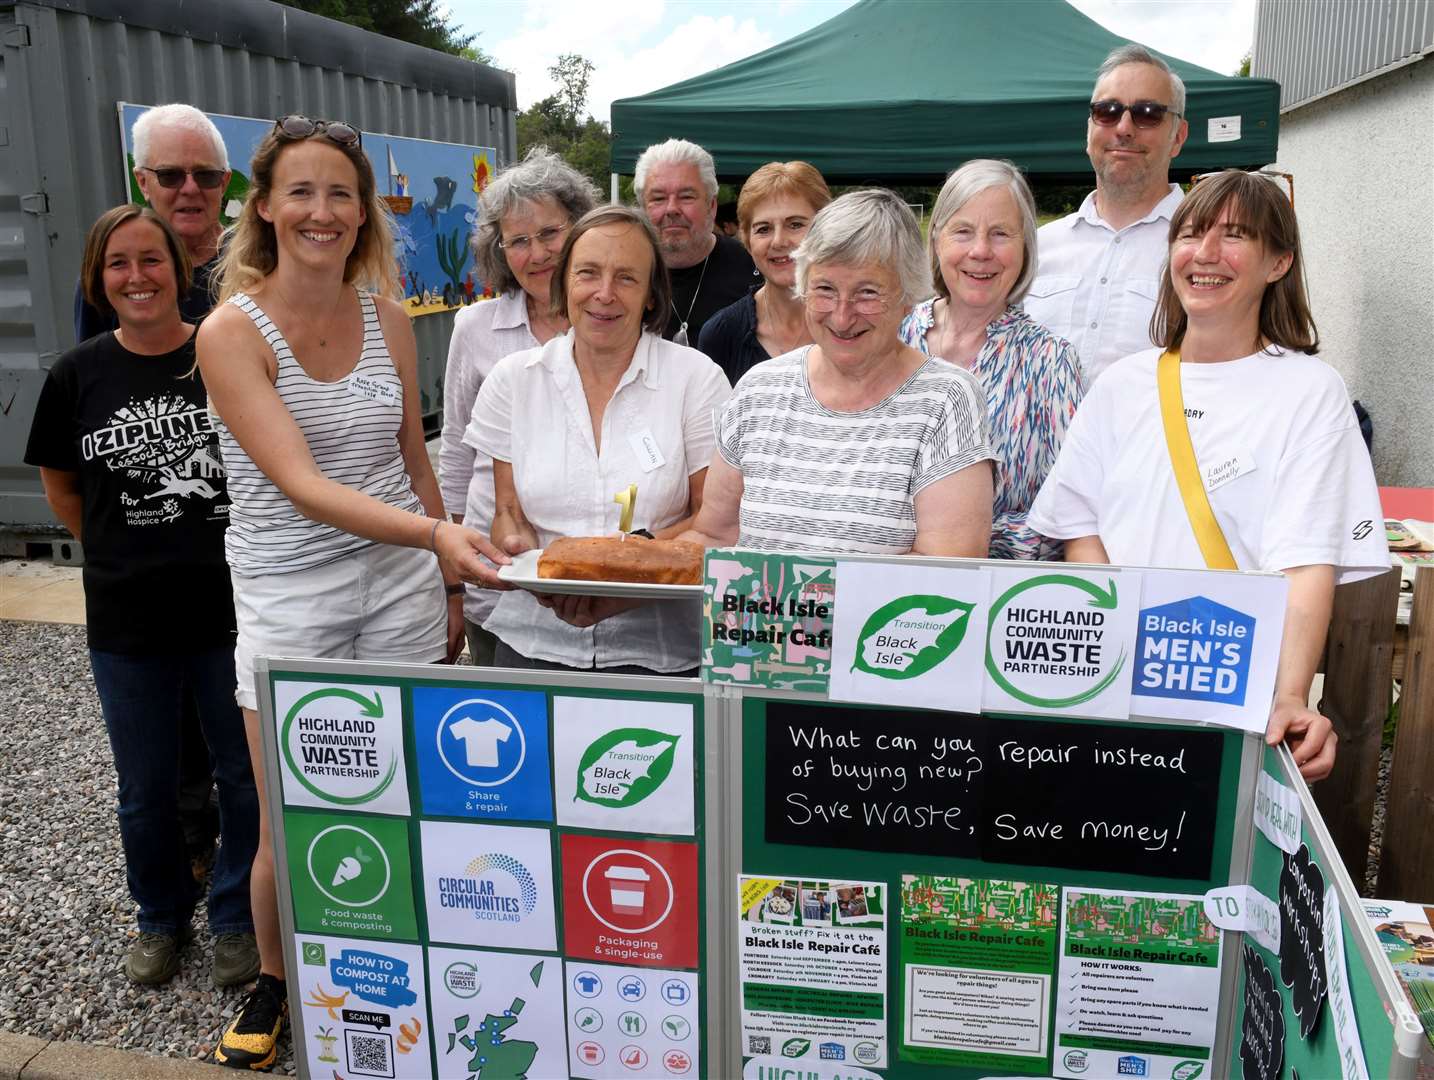 Repair Cafe volunteers with 1st birthday cake (l-r): Katy Jenkins, Richard Evans, Rose Grant, Cate Scrim, Gillian Newman, Robin Witheridge, Sheena Ross, Janet Witheridge, Alison Garroway, James Todd and Laura Donnelly.